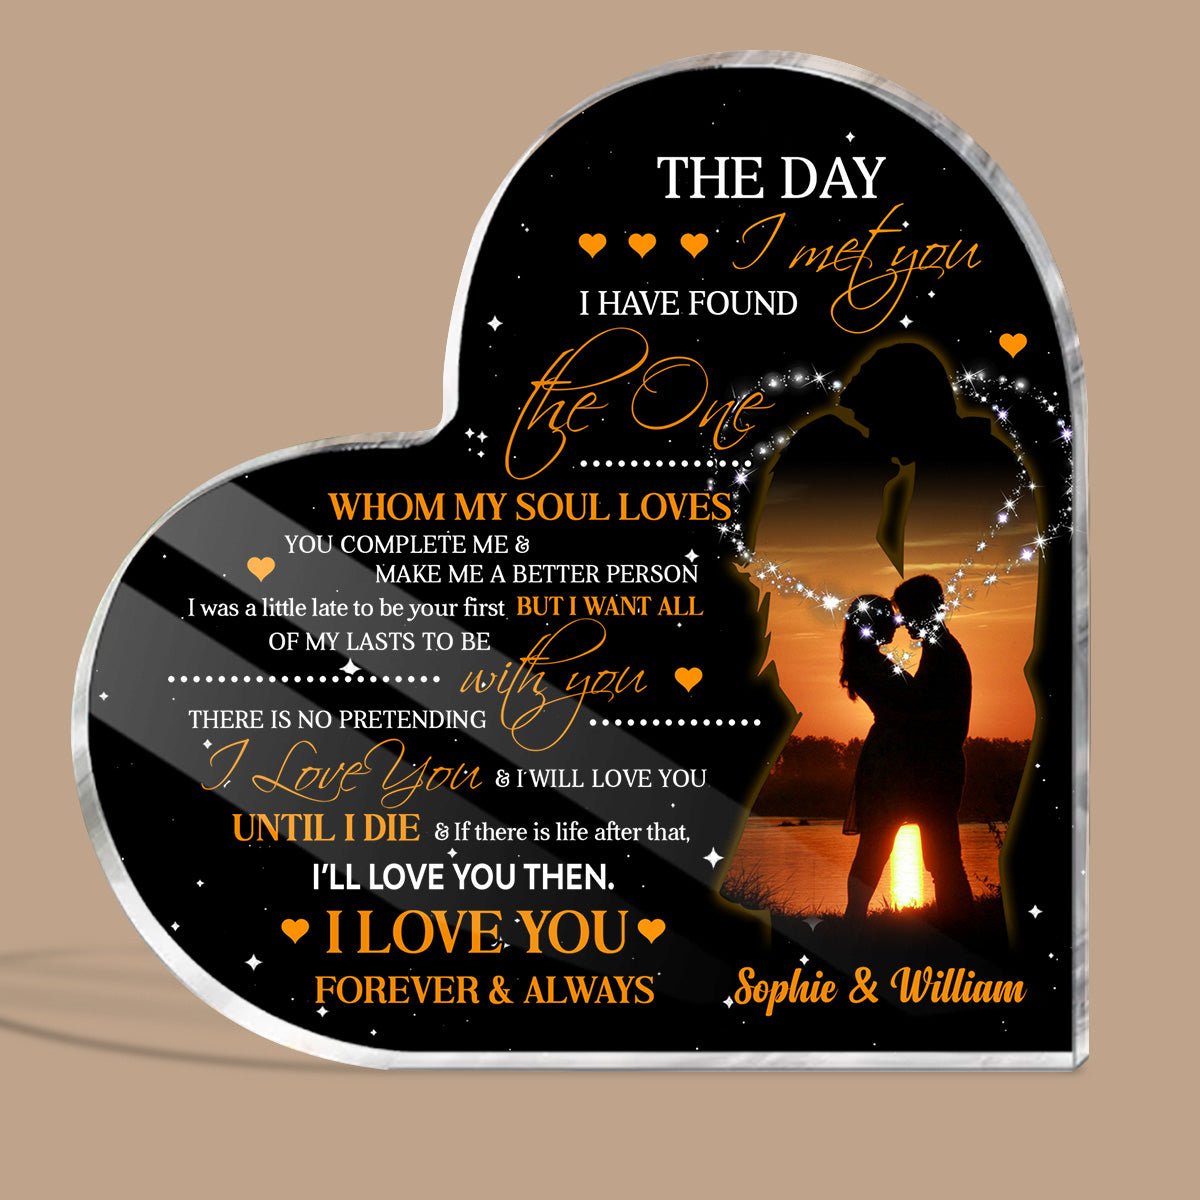 The Day I Met You Couple Sunset Sky - Personalized Heart Plaque - Gift for Couple